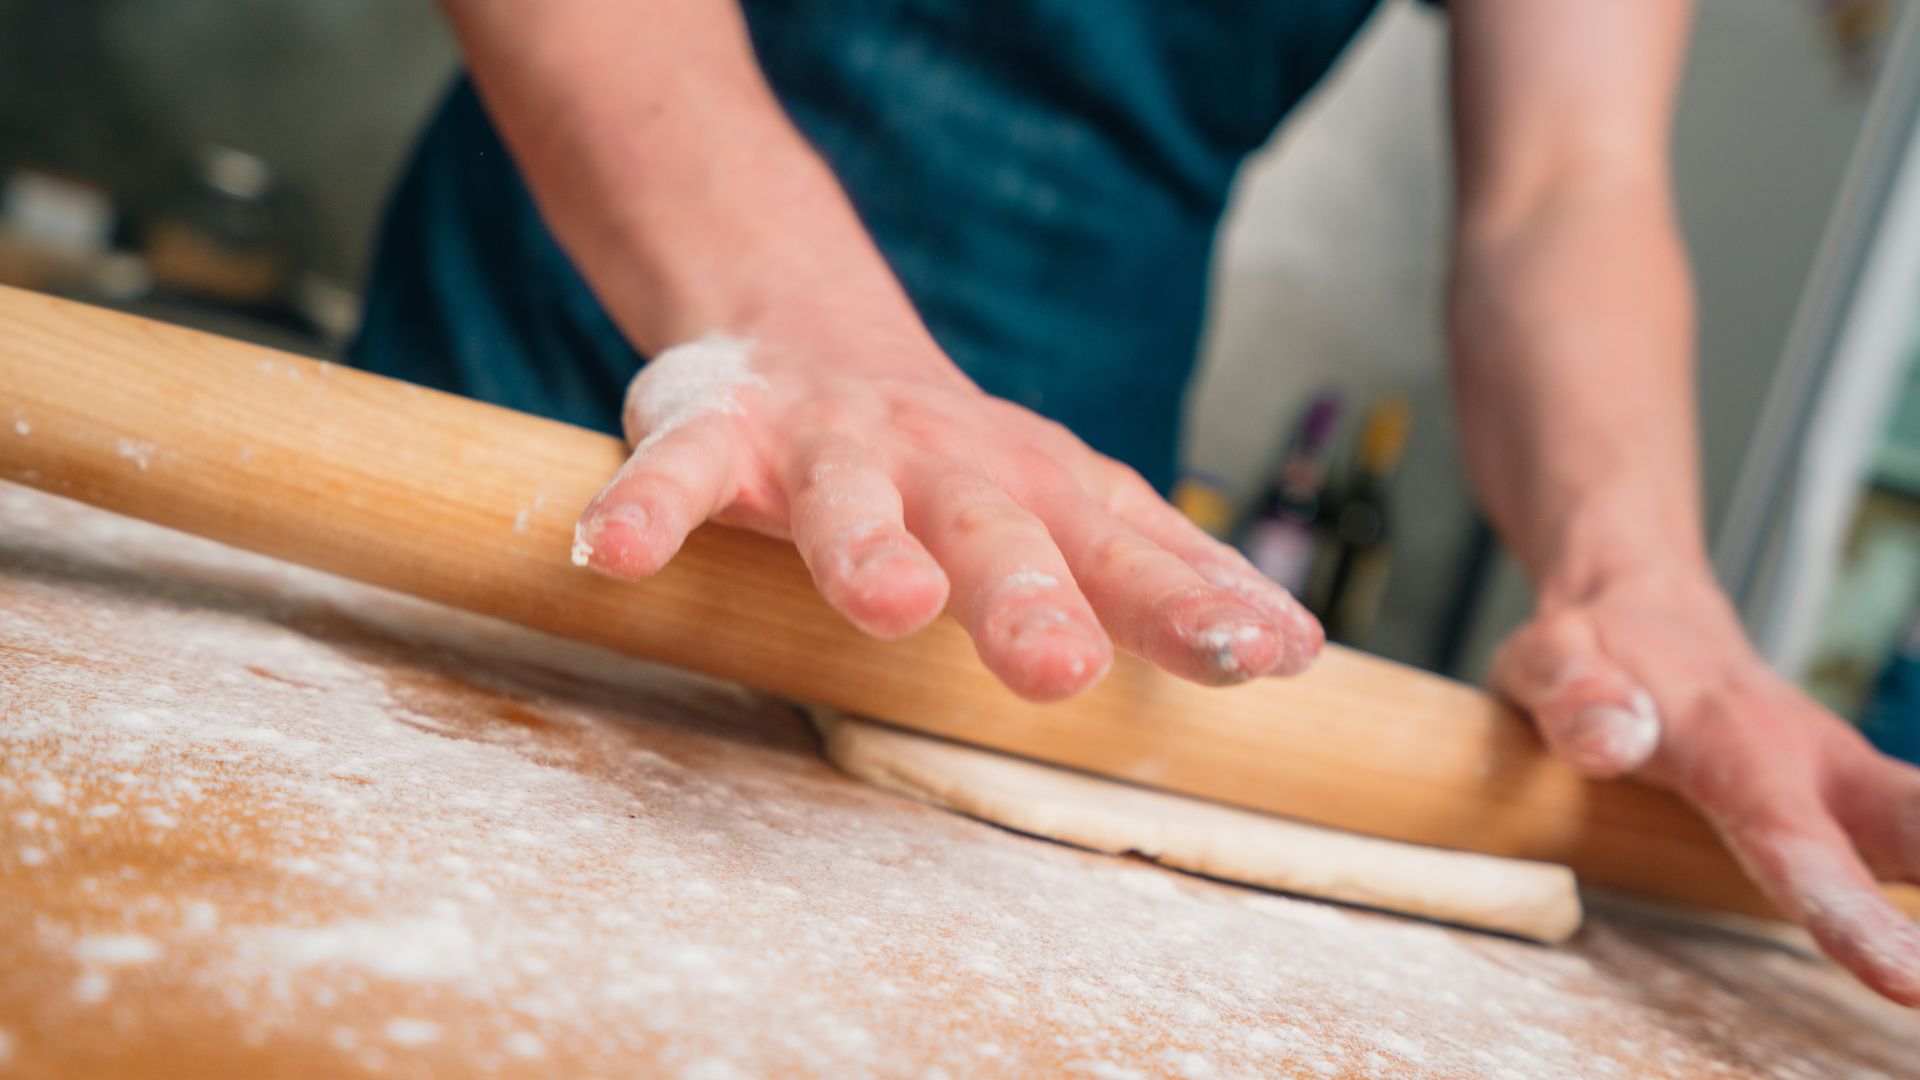 Image of Video: How to make Puff Pastry dough from scratch